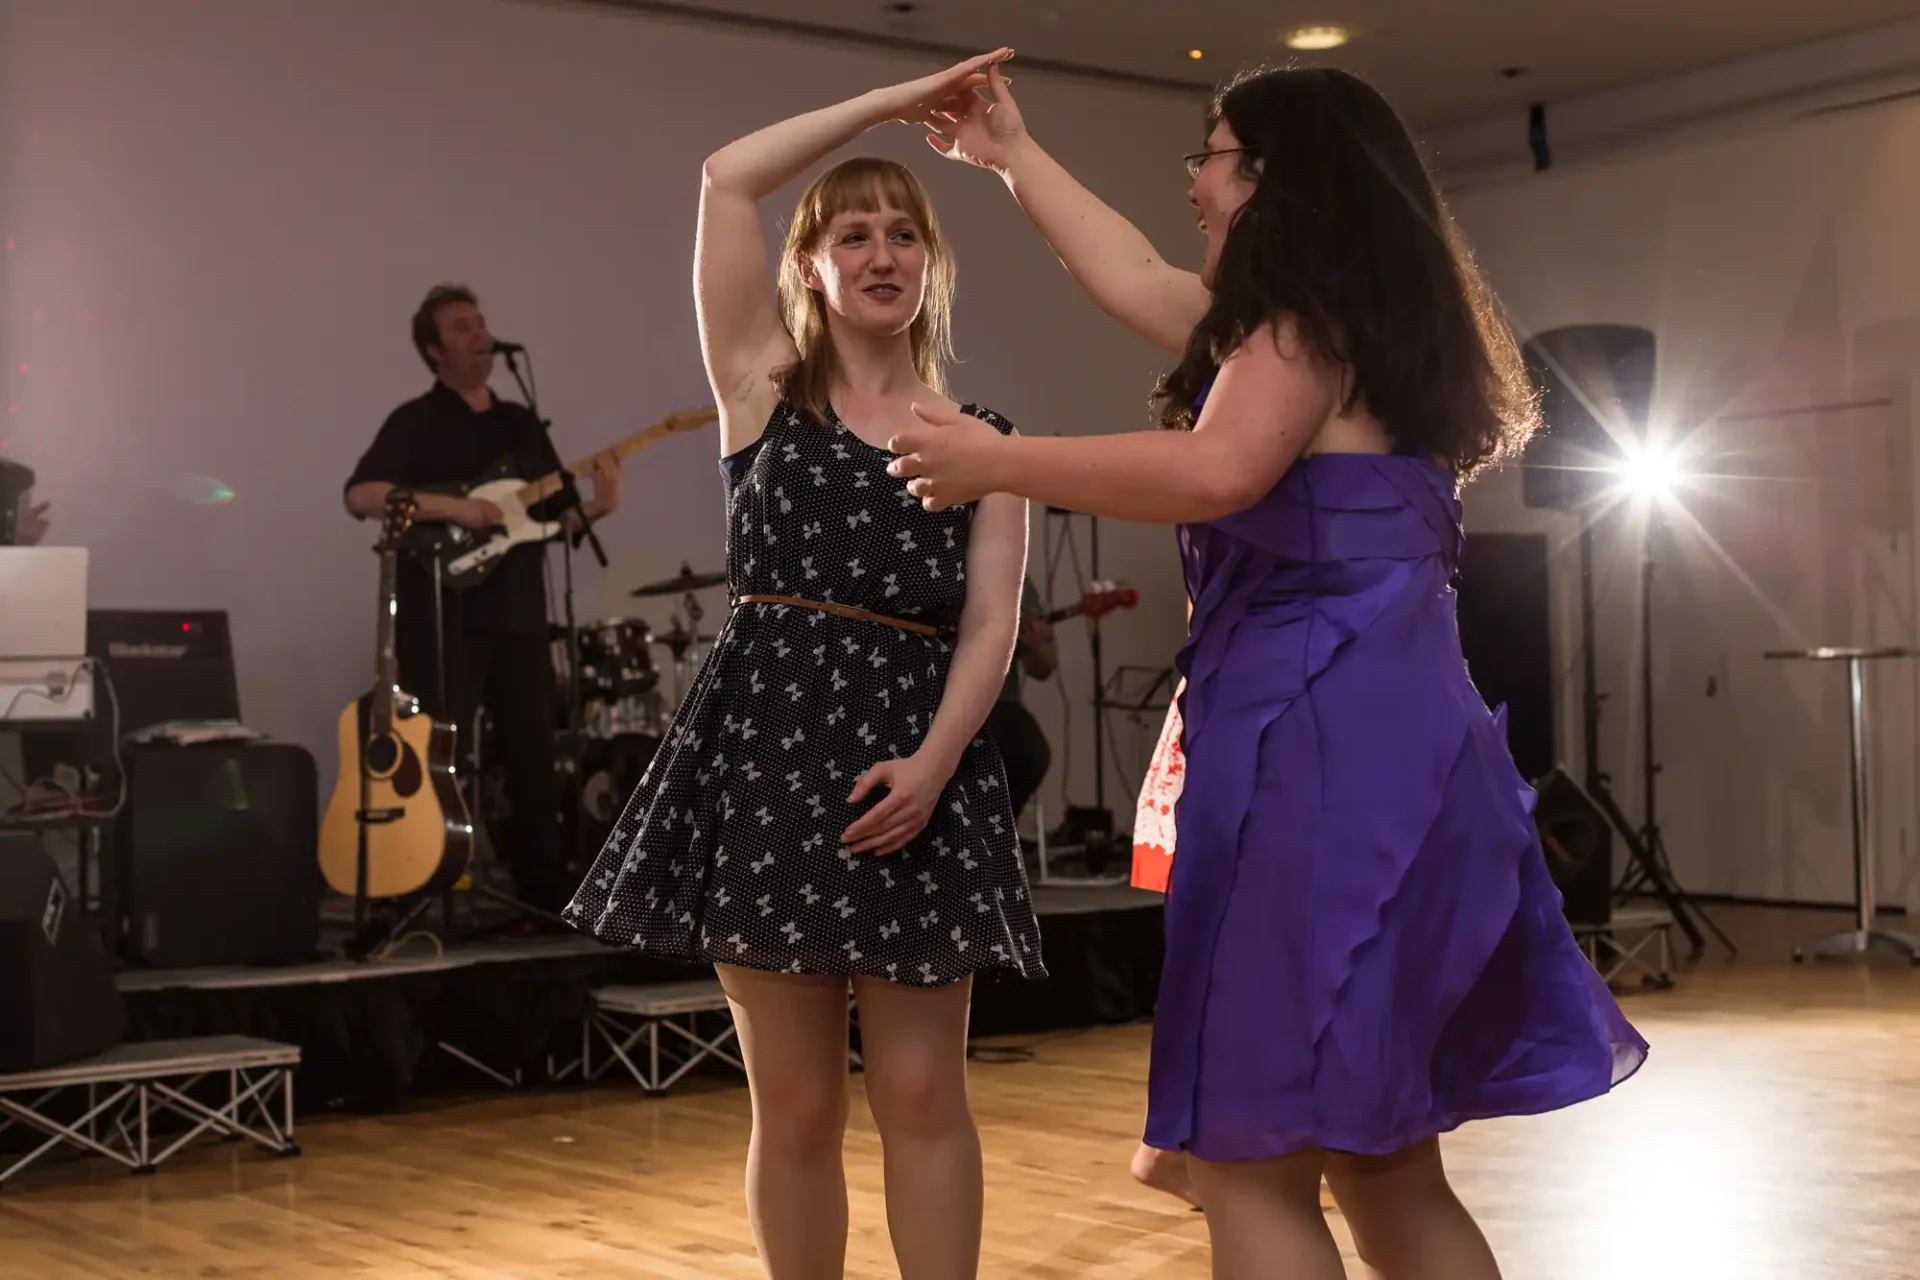 Two women dancing and smiling at each other in a ballroom with a live band playing in the background.